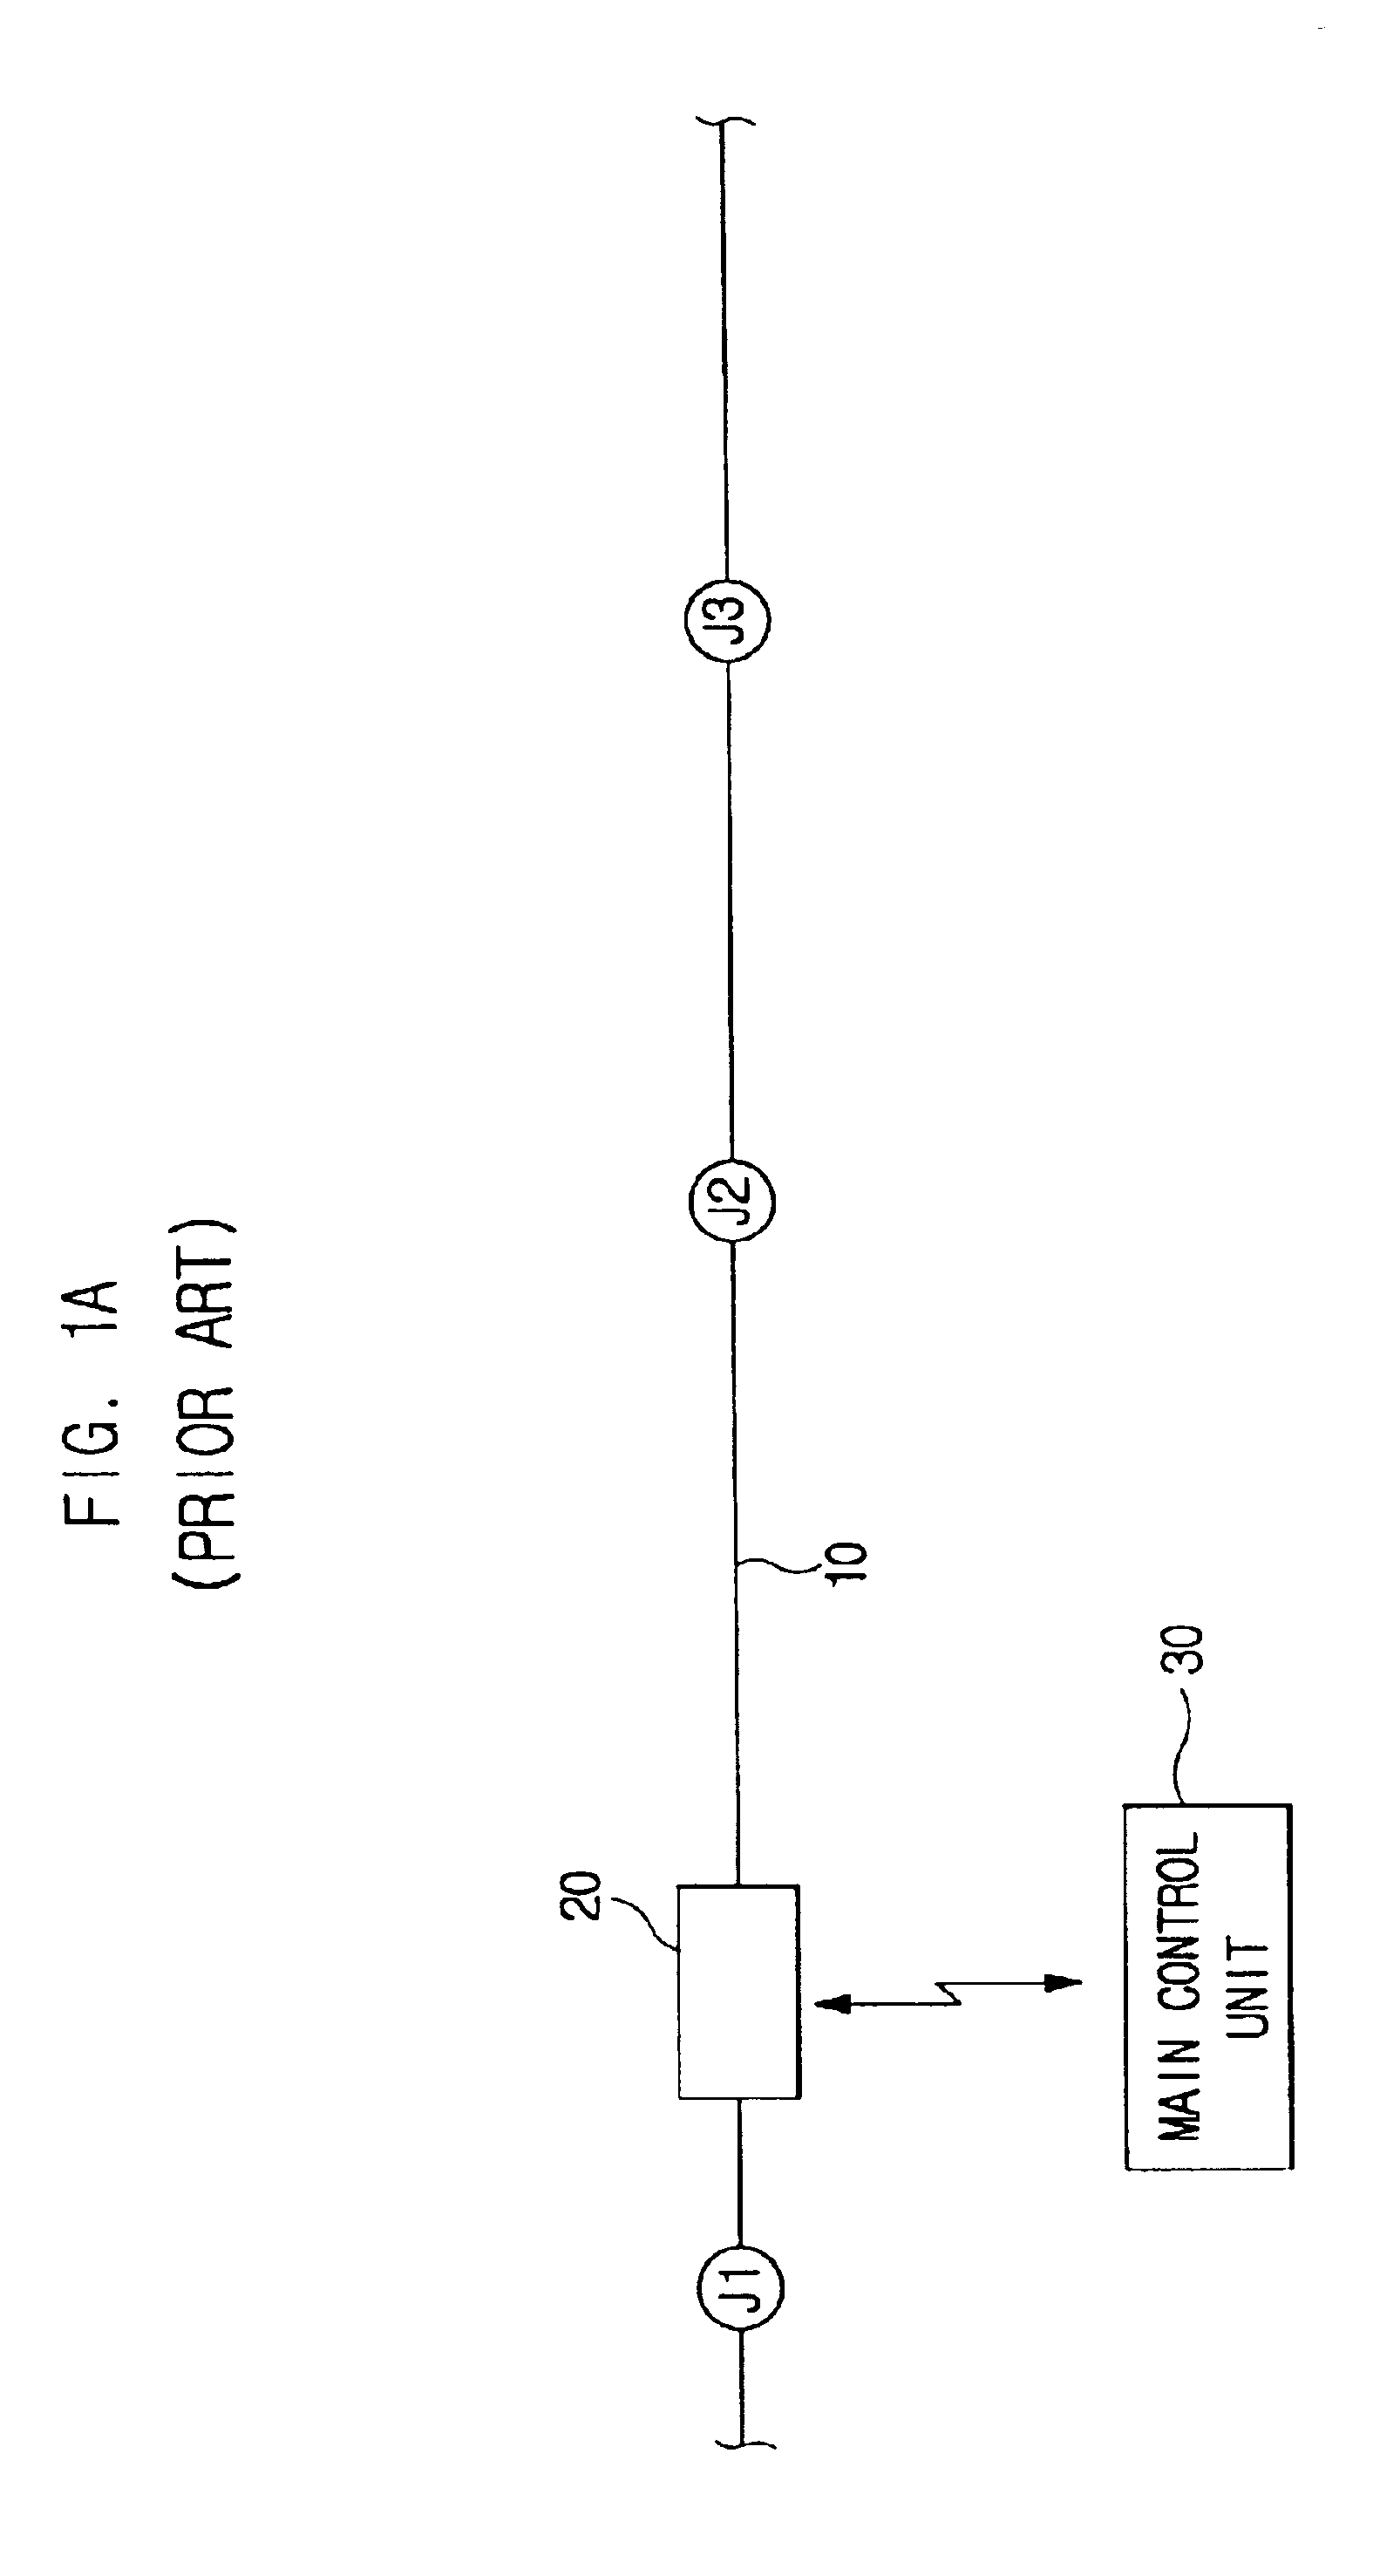 Method of controlling automatic guided vehicle system